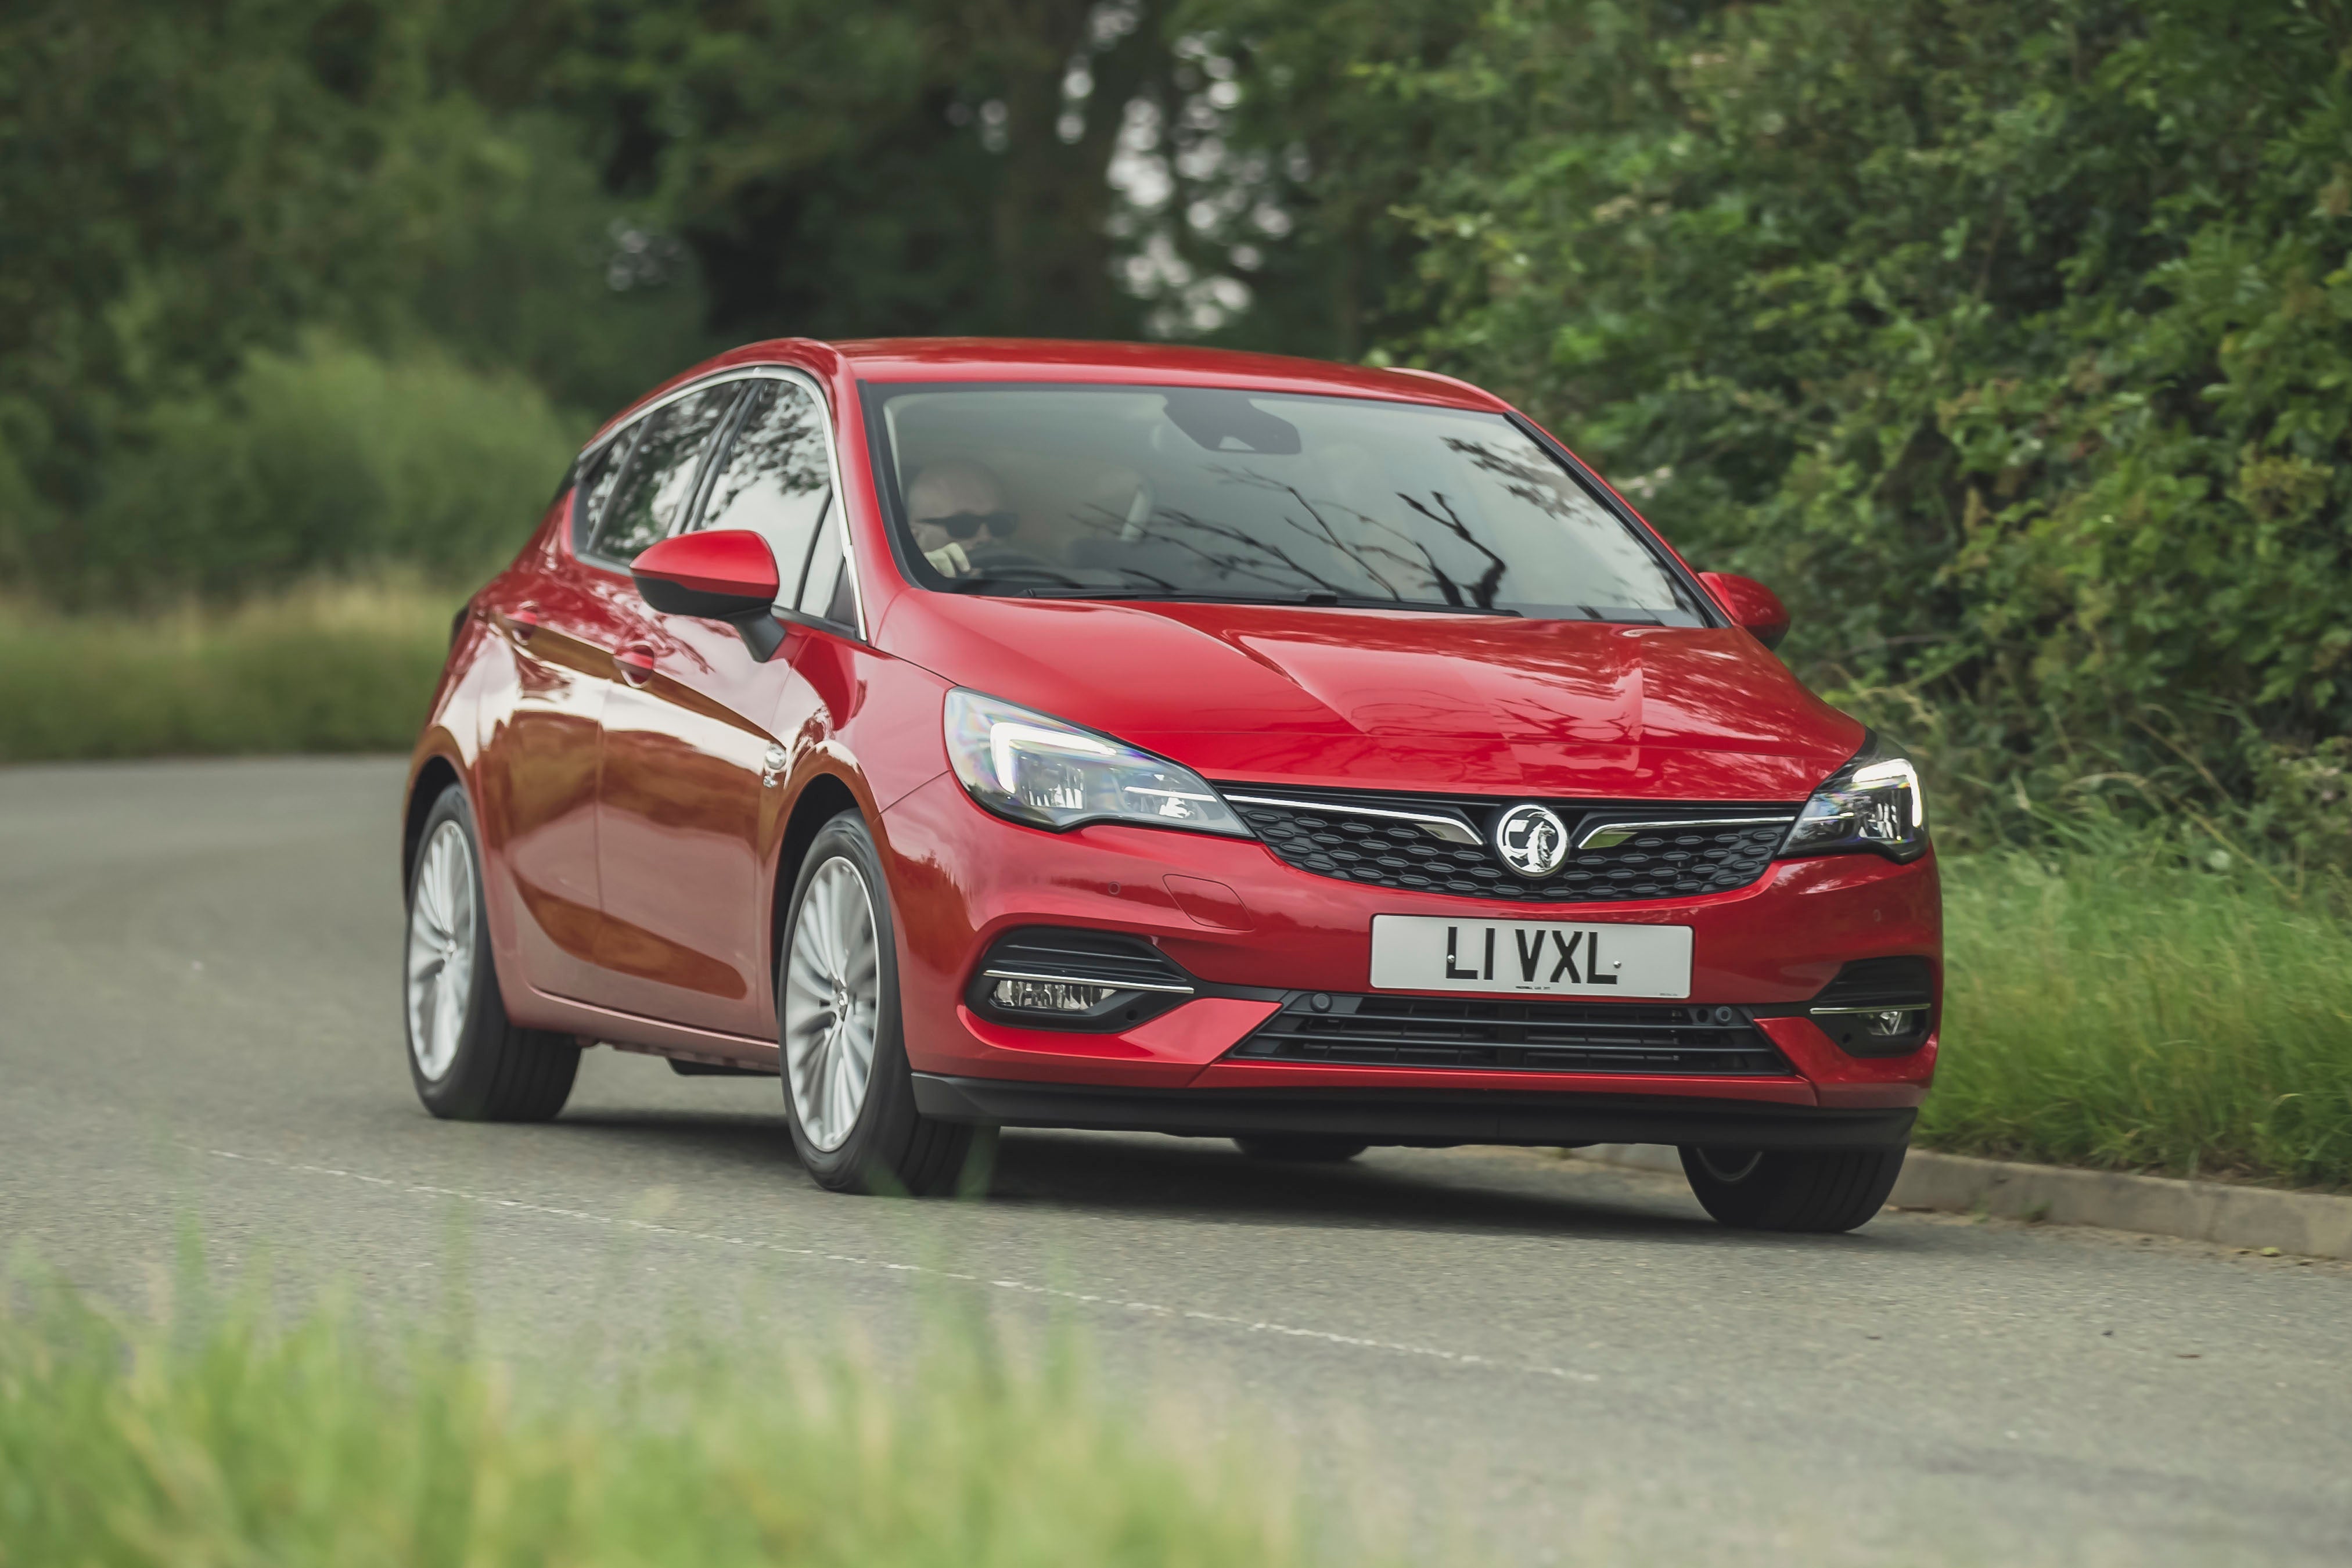 Used Vauxhall Astra (2015 - 2023) Review: Front View